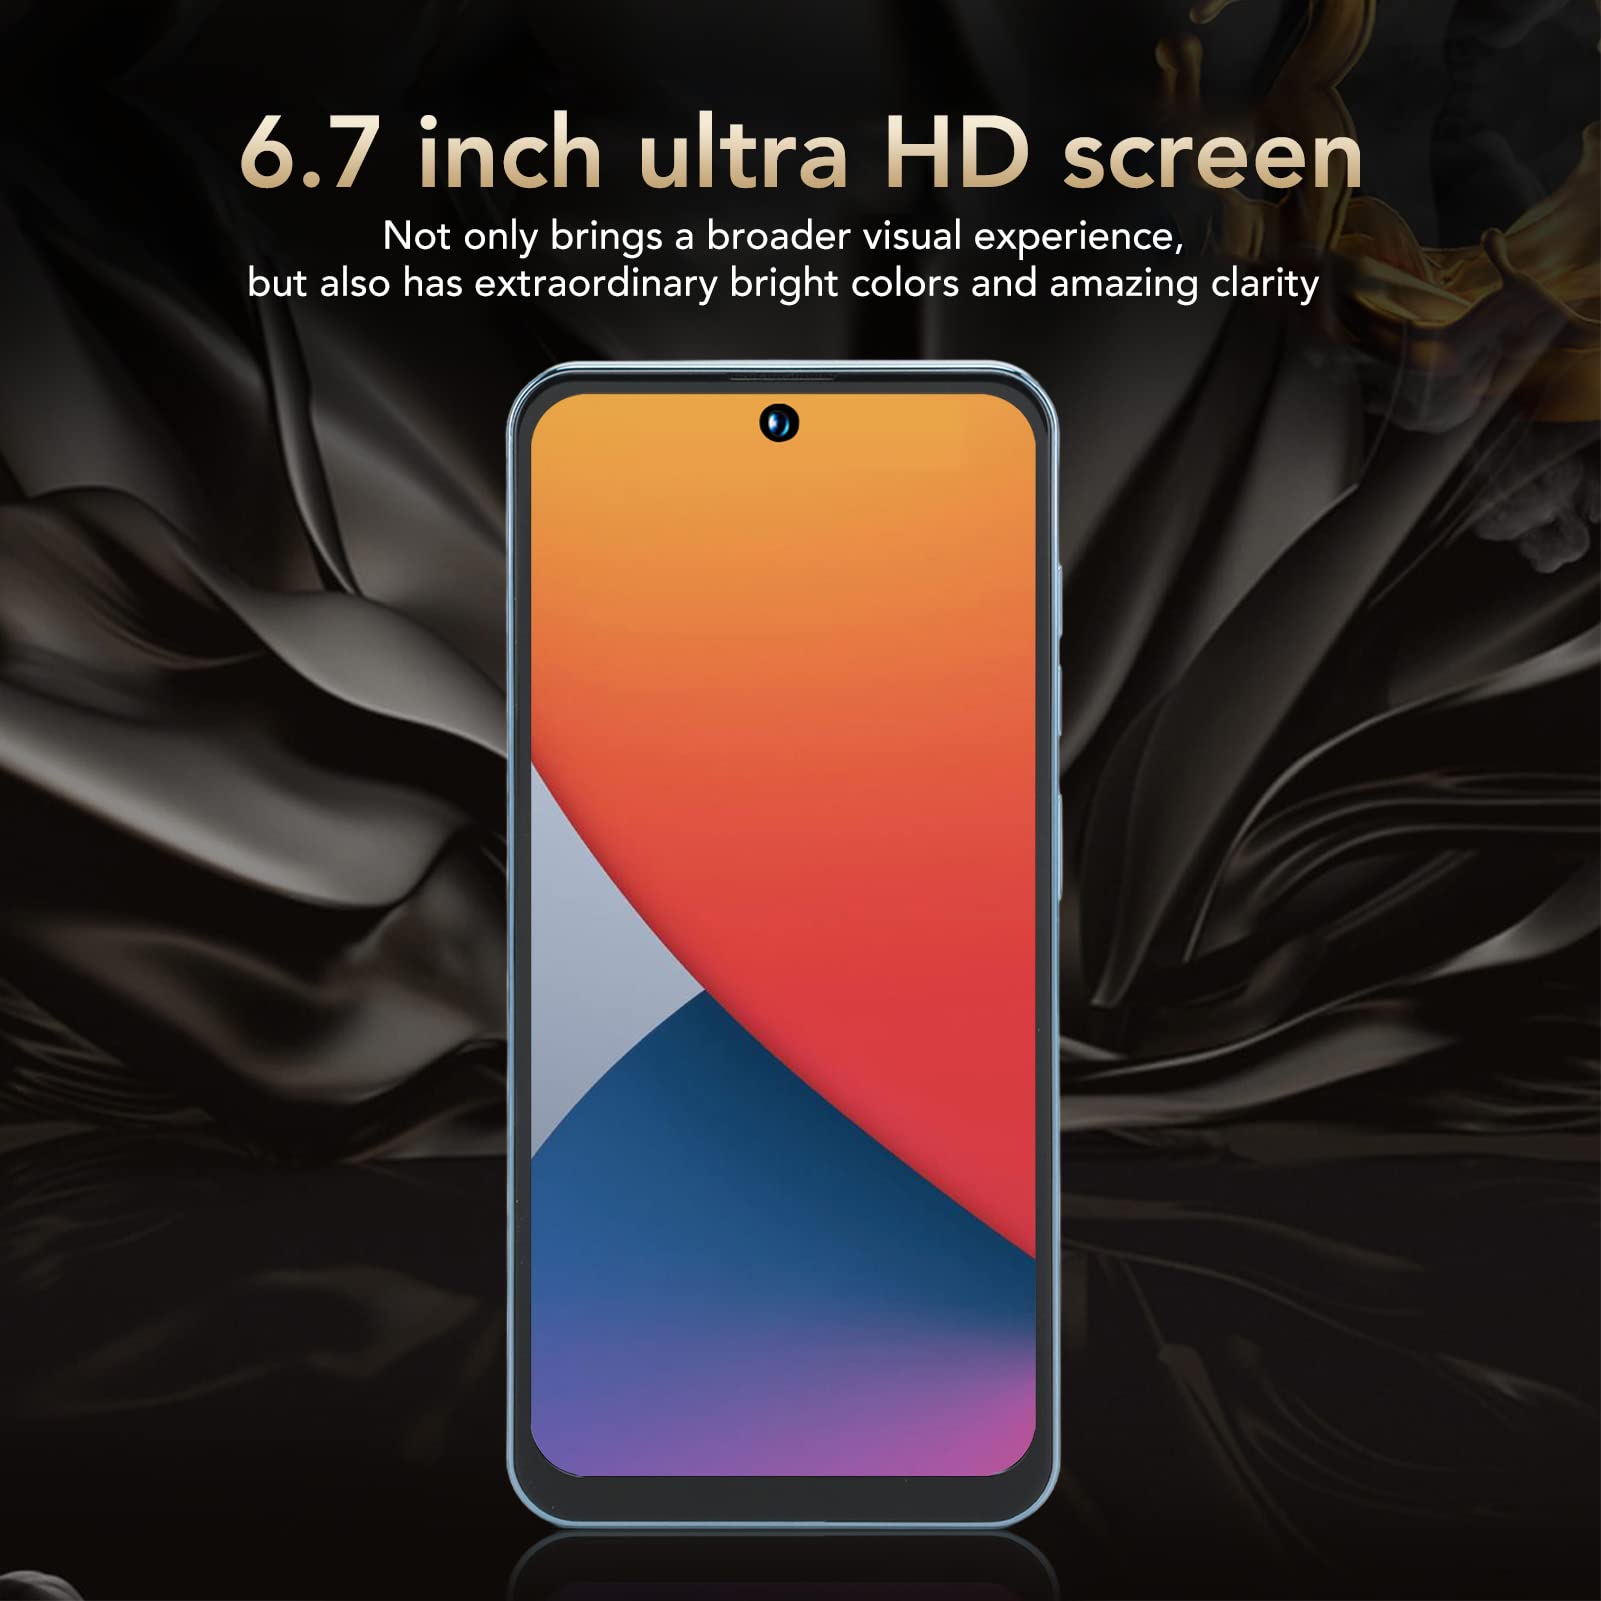 I14 Promax 6.7 Inch Punch Screen 4G Smartphone with 16M Rear and 8M Front Camera for Android 12 4GB RAM 128GB ROM 4000mAh Long Battery Life for Elderly Kids(USA)